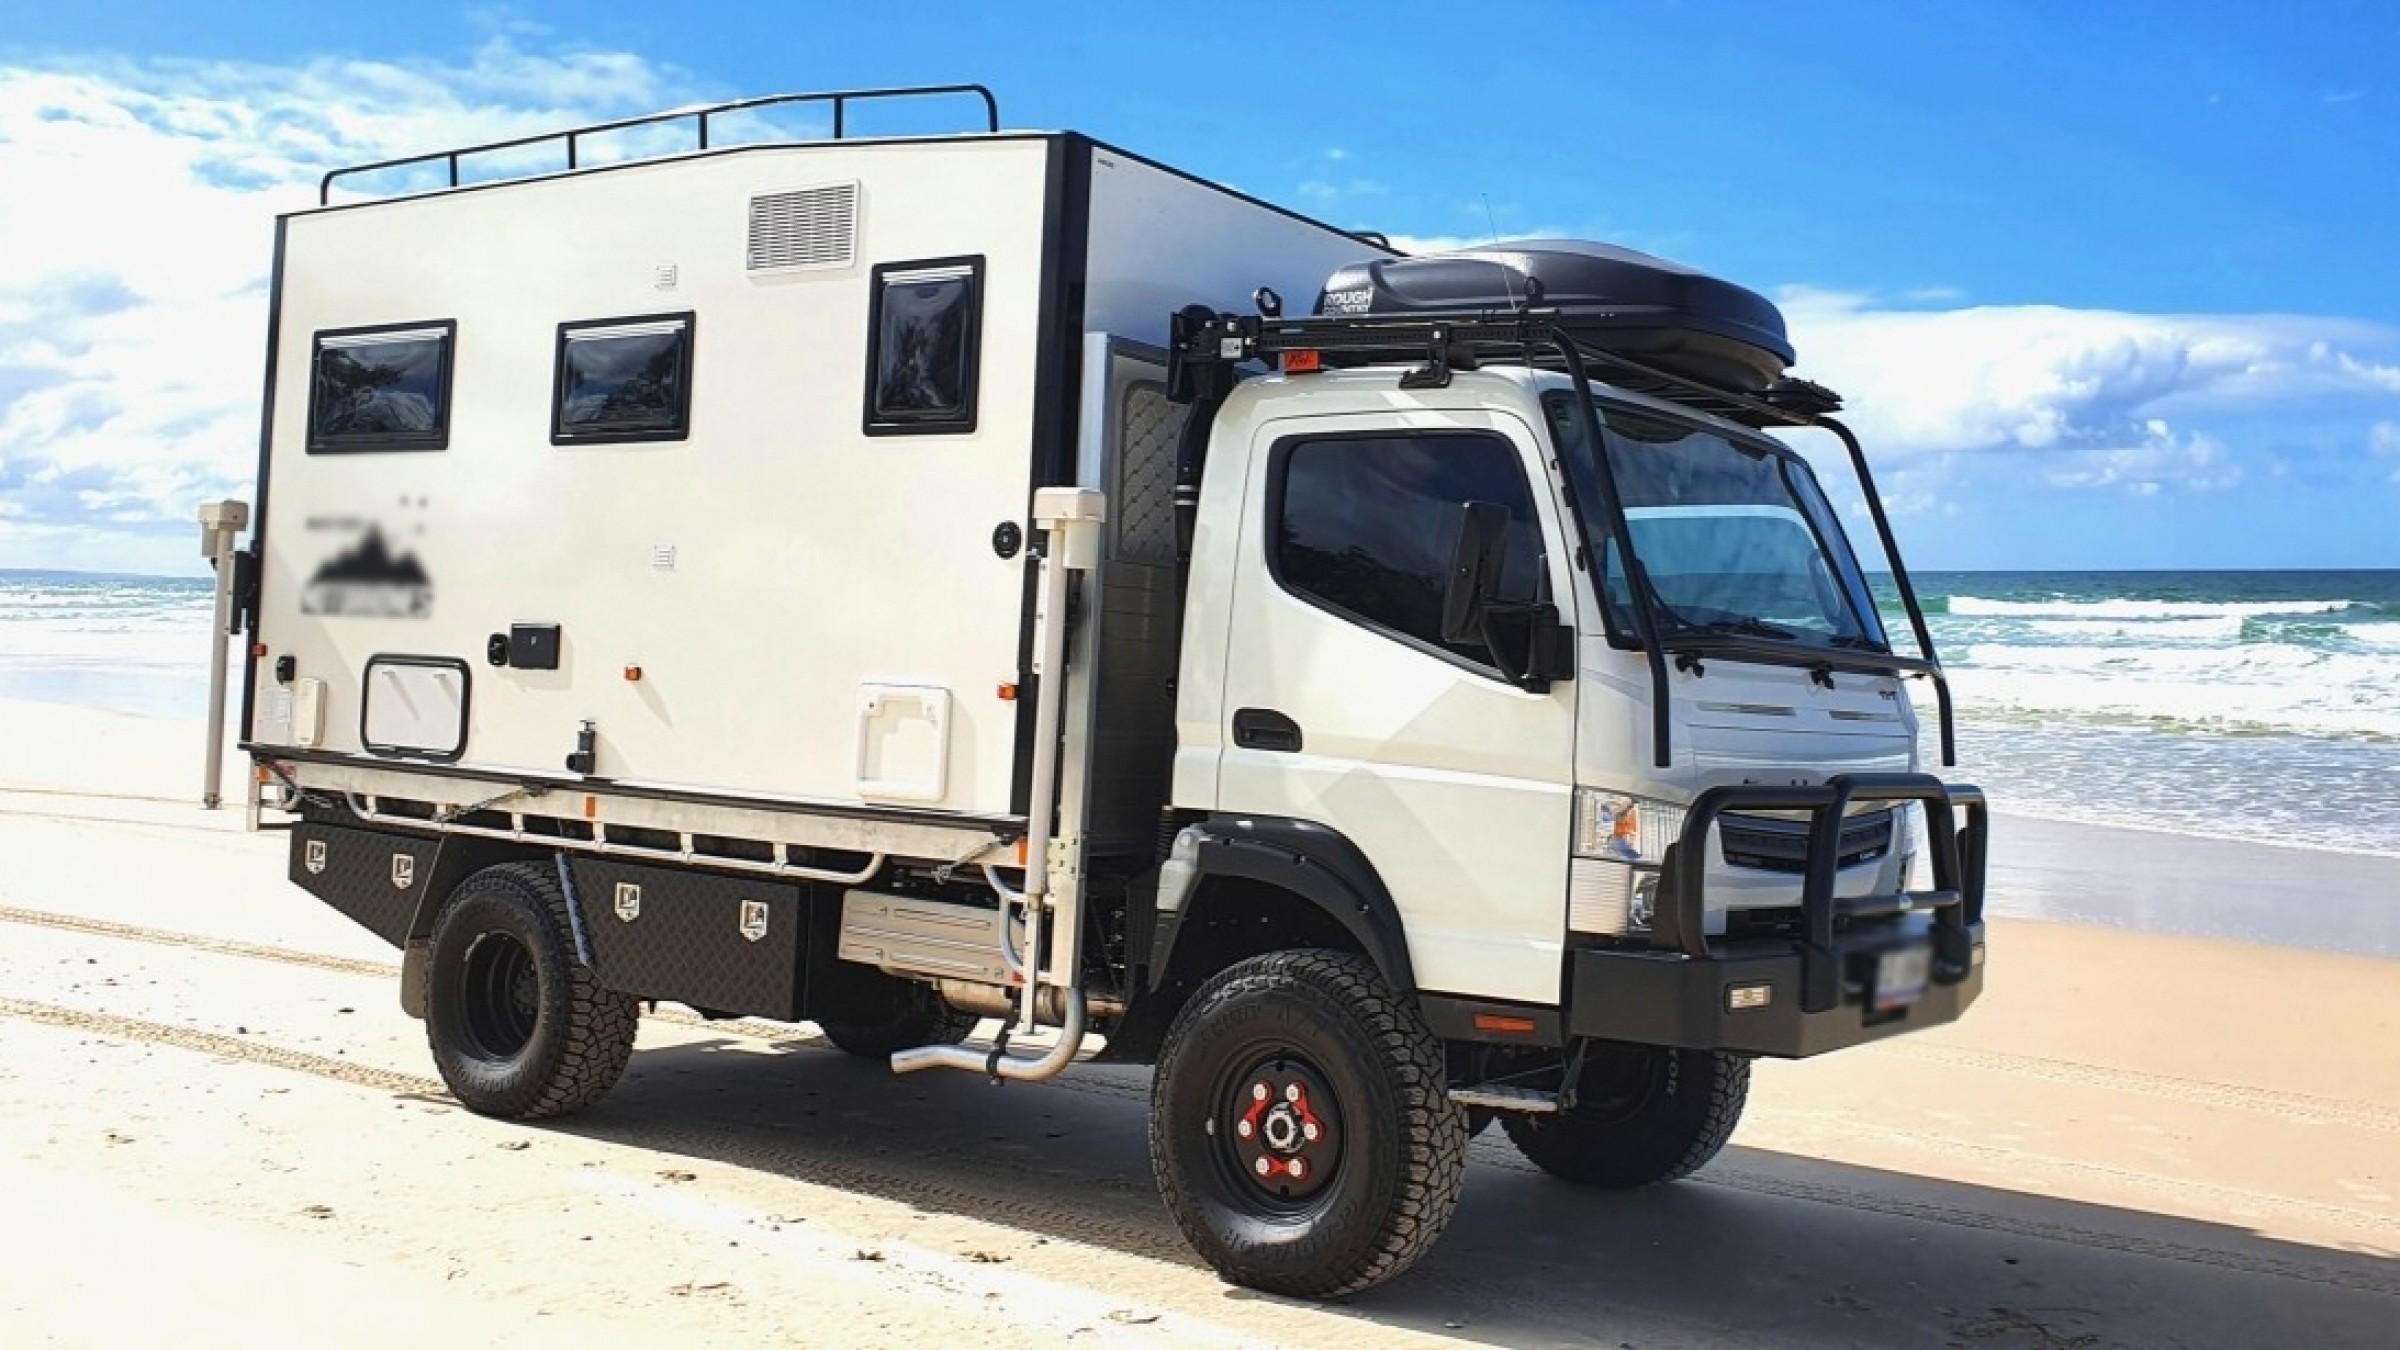 Motorhomes & RVs | NSW Distribution Rights...Business For Sale